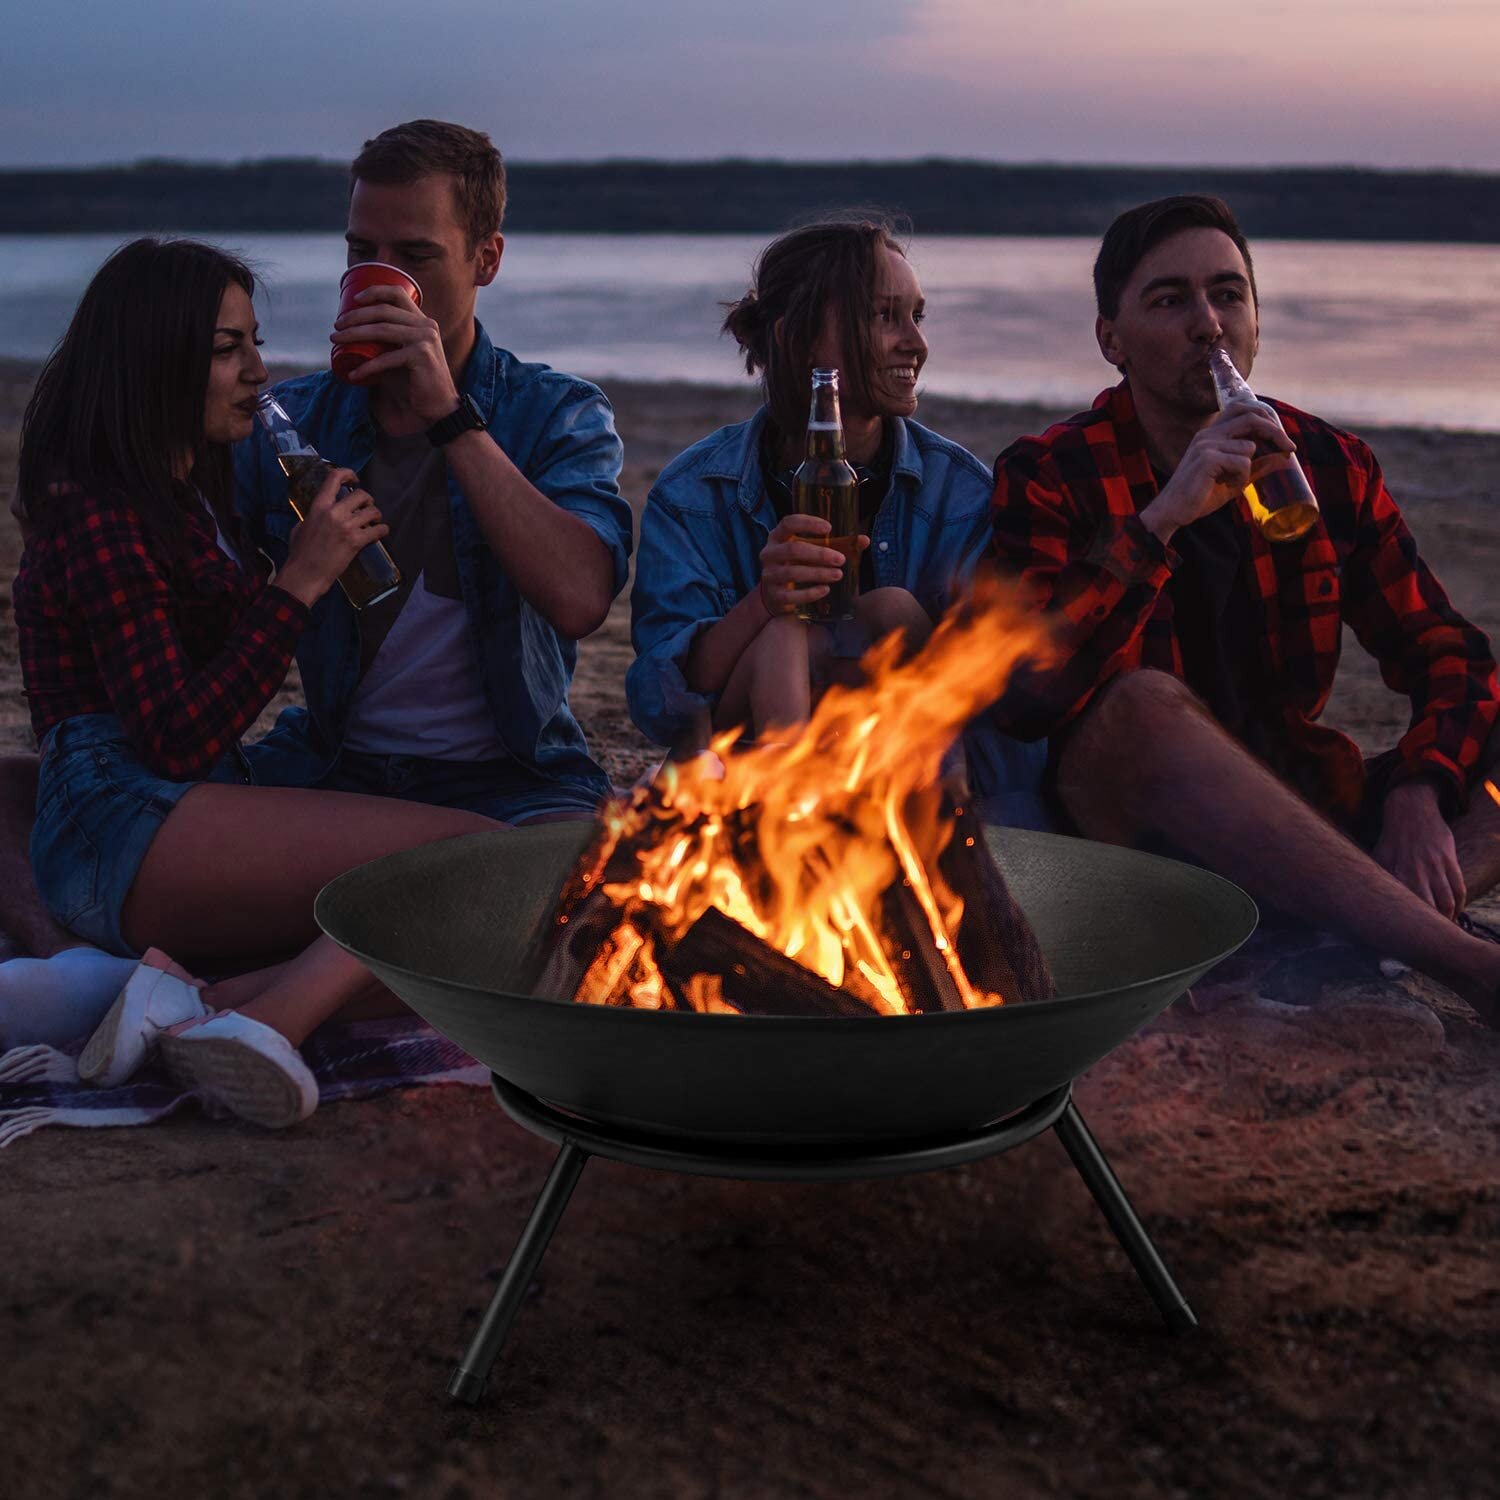 Amagabeli Fire Pit Outdoor Wood Burning 22.6in Cast Iron Firebowl Fireplace Heater Log Charcoal Burner Extra Deep Large Round Camping Outside Patio Backyard Deck Heavy Duty Metal Grate Black 